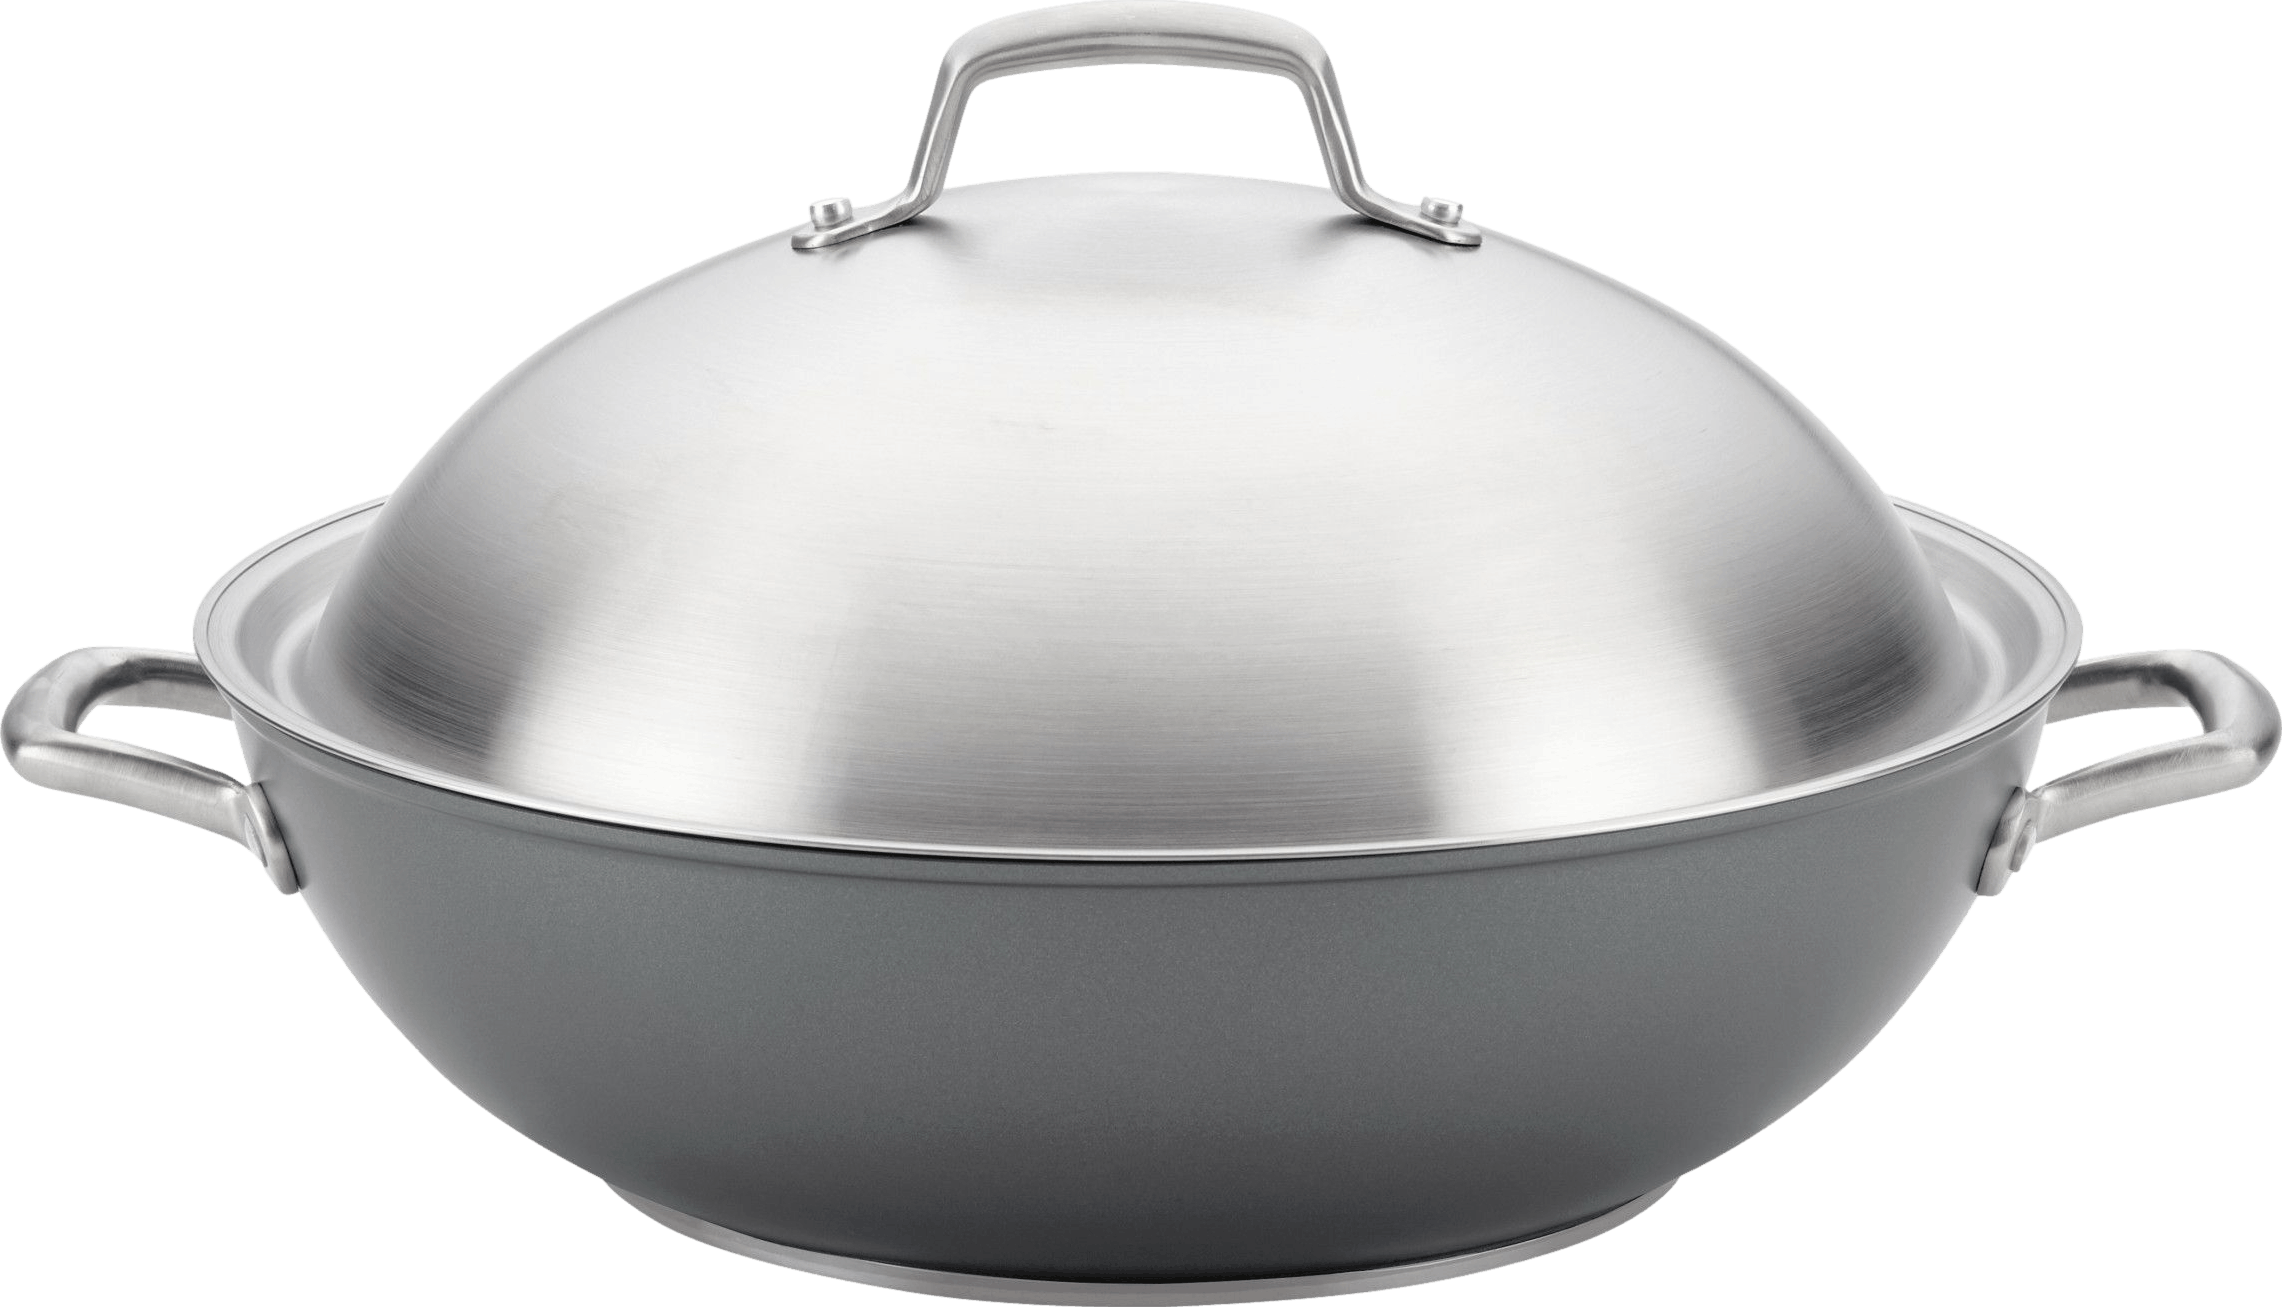 Supor Metal Utensil Safe Iron Wok with Glass Lid - 13.5 in